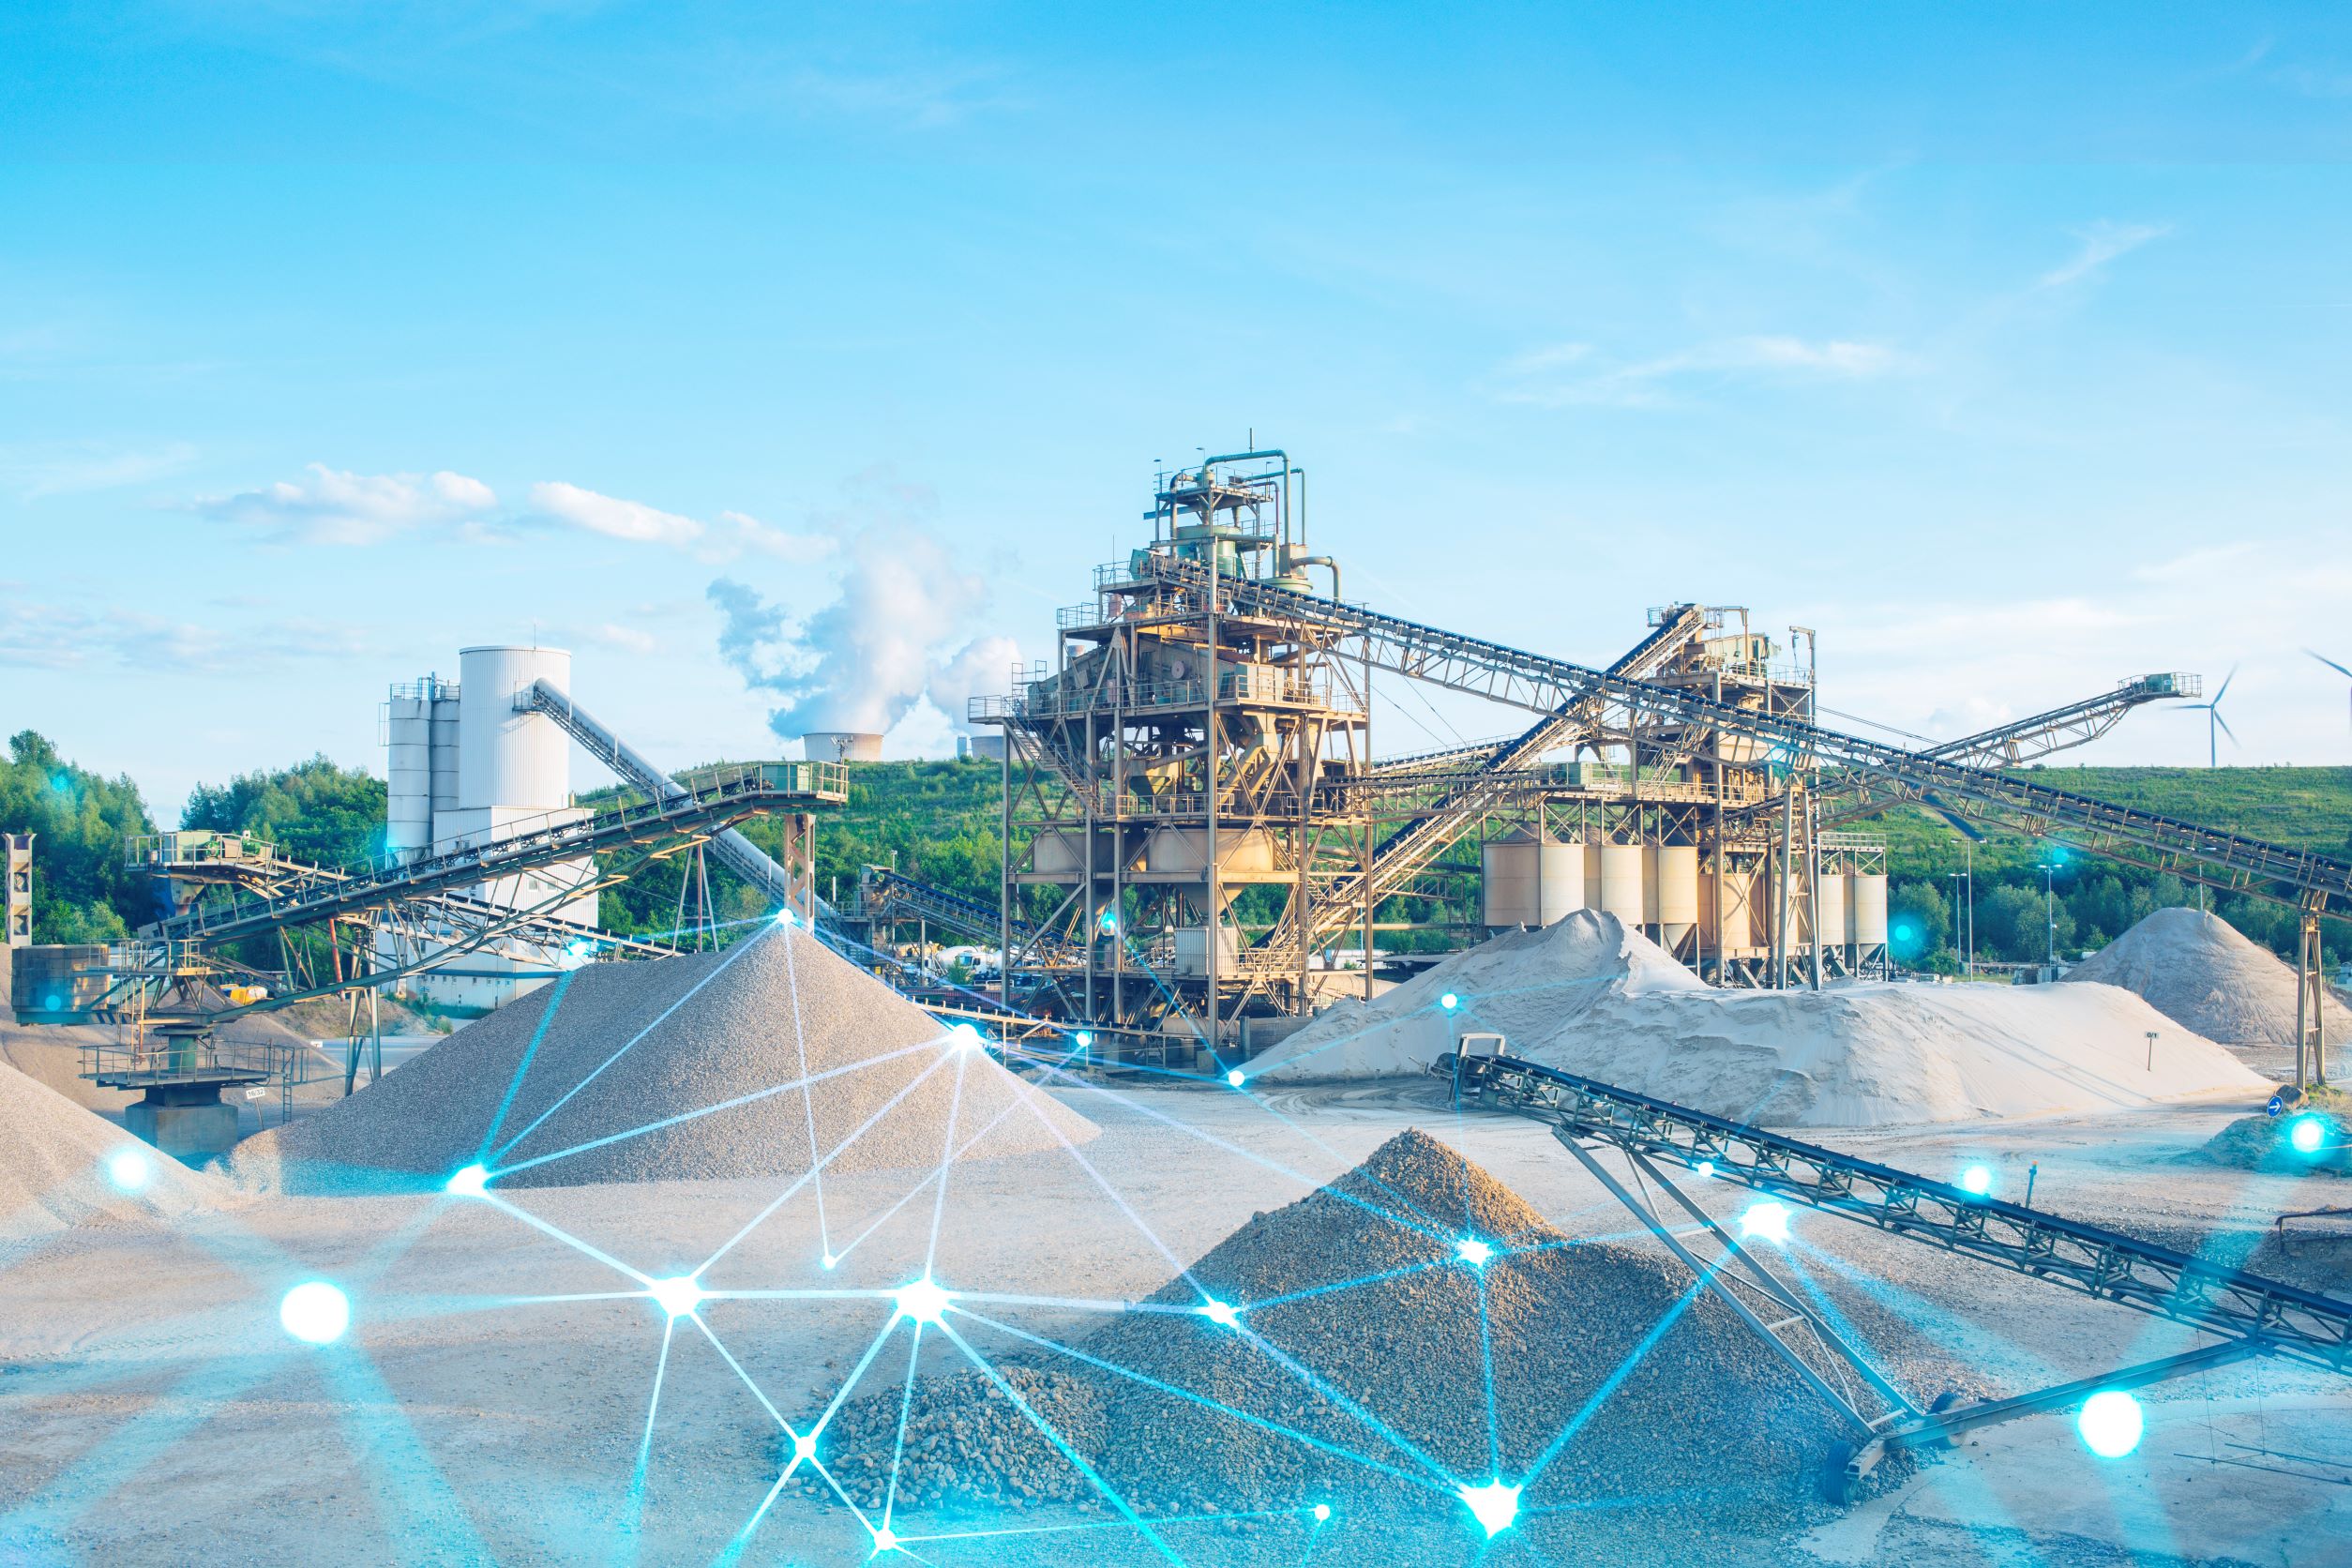 Mining operations are becoming increasingly smart and digitized, with key pieces of equipment connected via industrial communications networks in order to run autonomously.